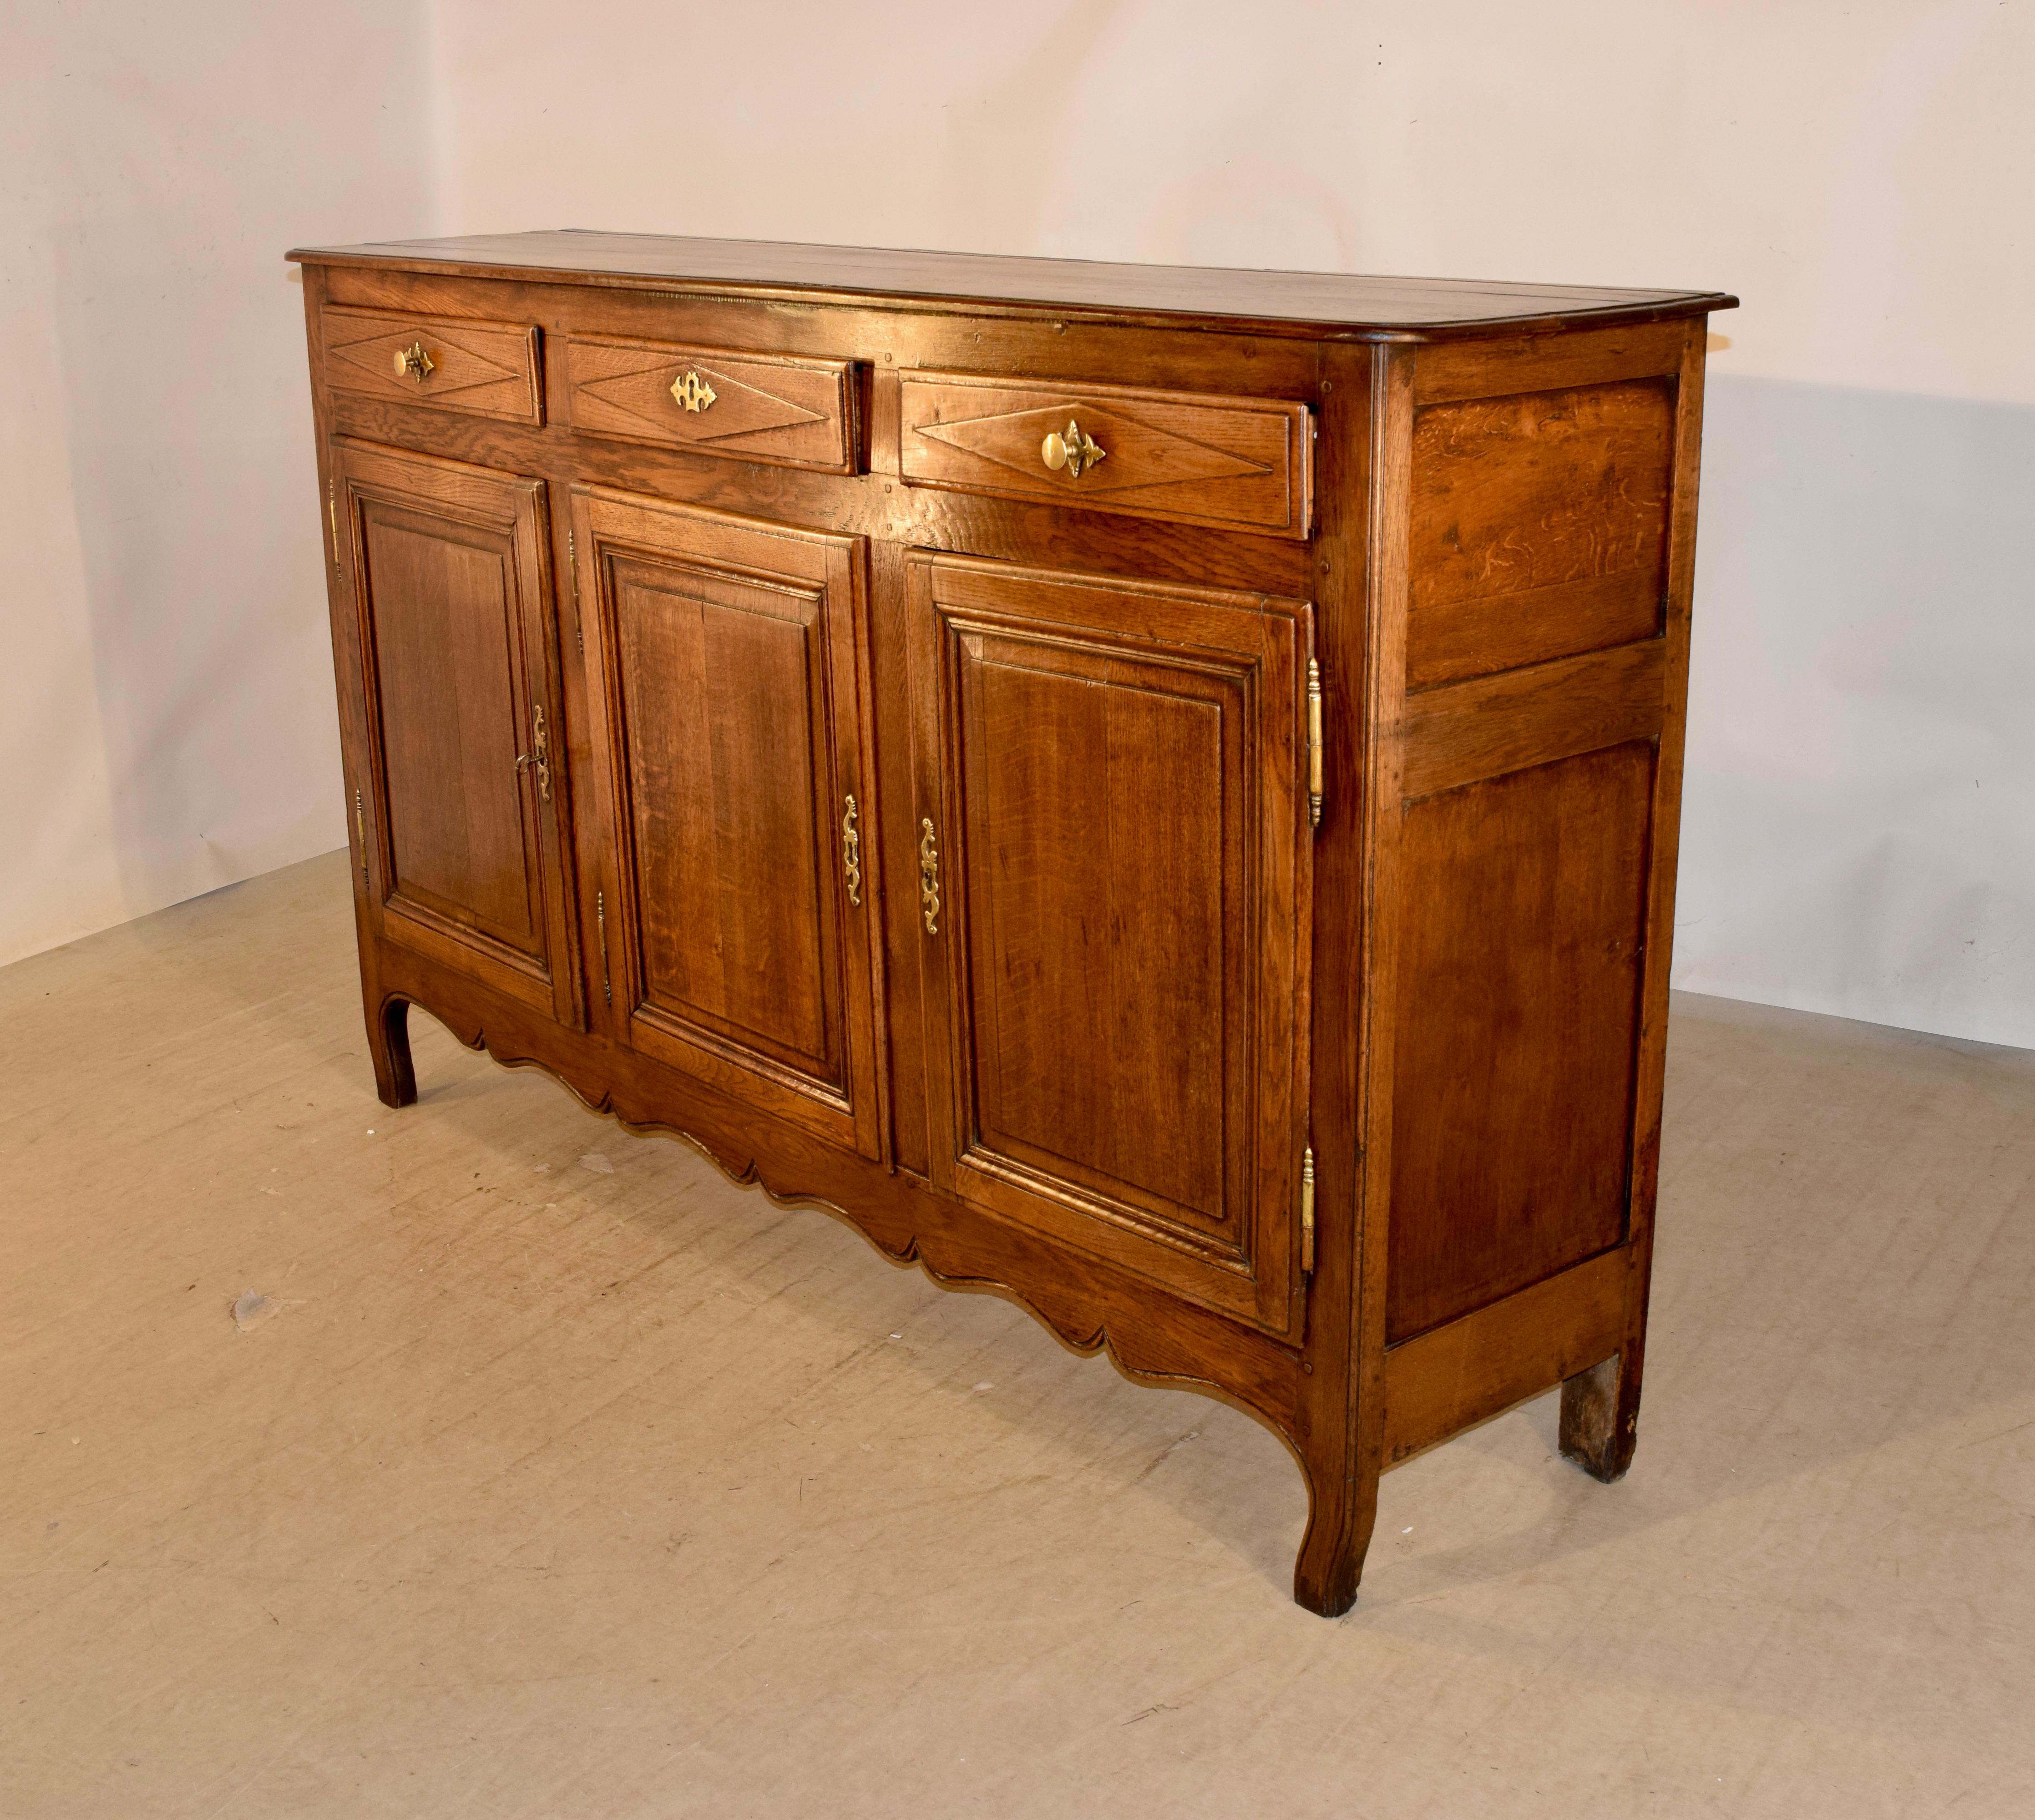 Early 19th century enfilade from France with a beveled edge around the top, following down to paneled sides and three geometrically paneled drawers in the front, over three raised paneled doors, which open to reveal shelving. The skirt is scalloped